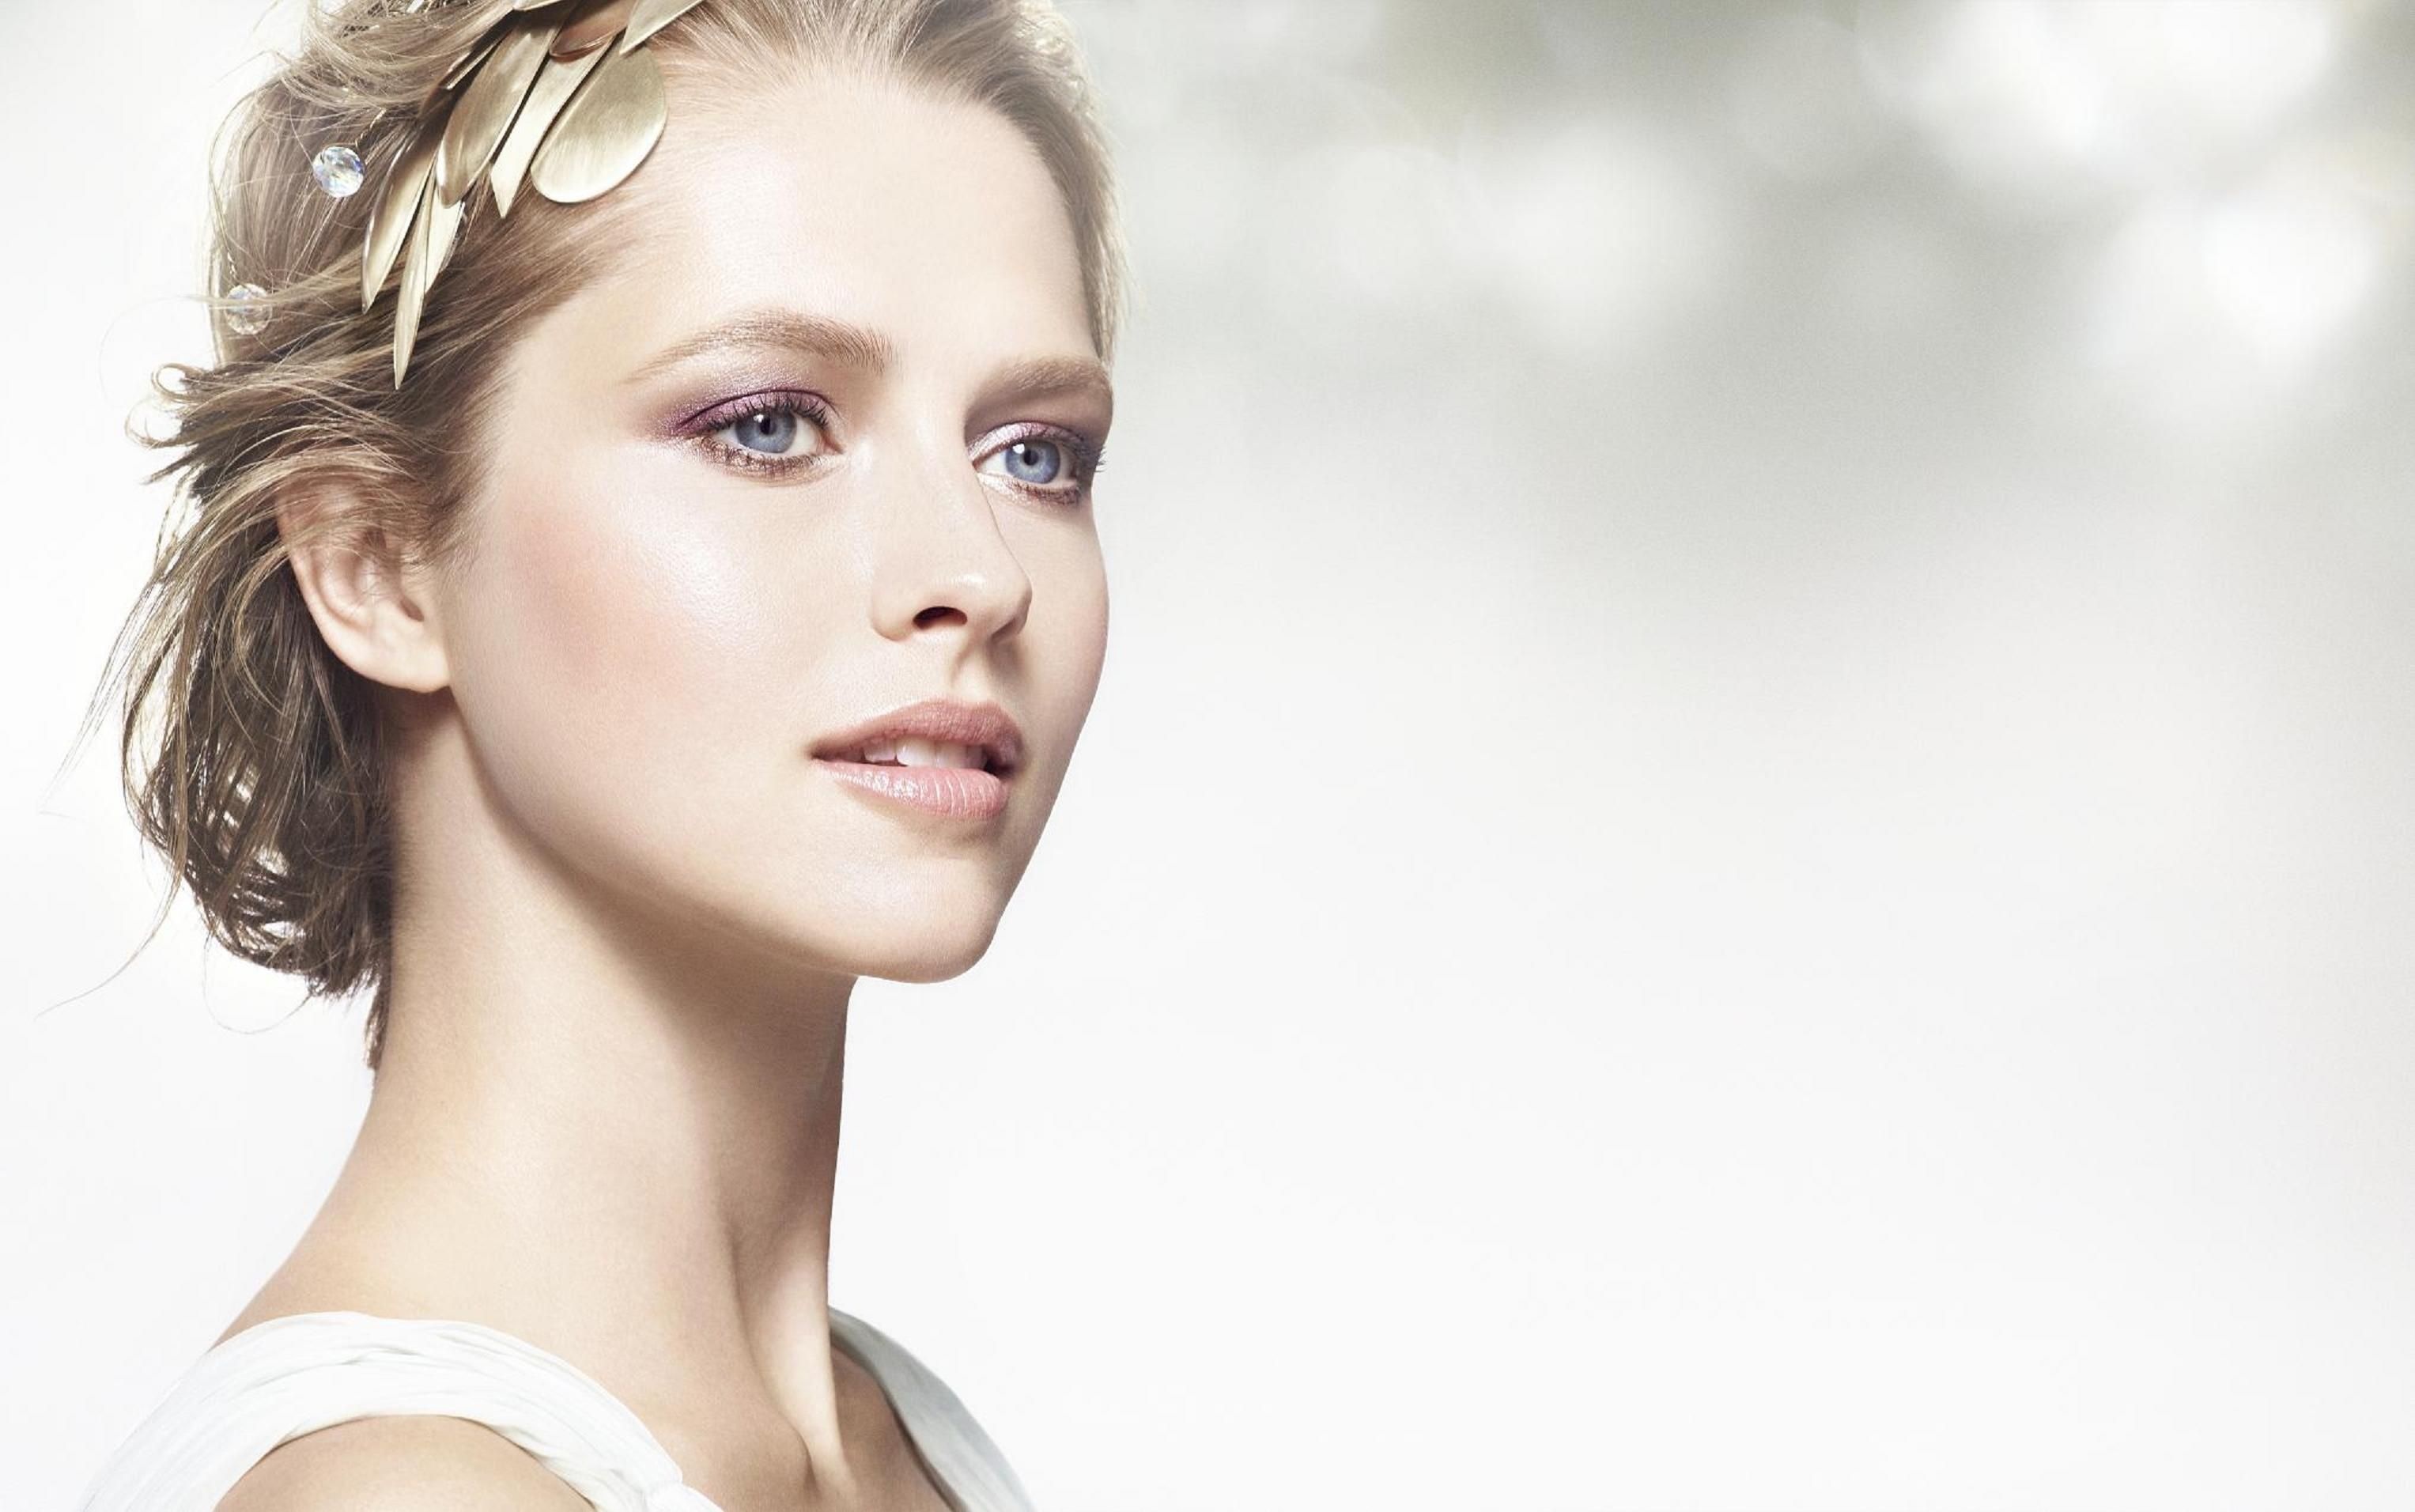 Teresa Palmer: Starred in December Boys, a coming-of-age film set in the 1960s, as Lucy. 3060x1920 HD Wallpaper.